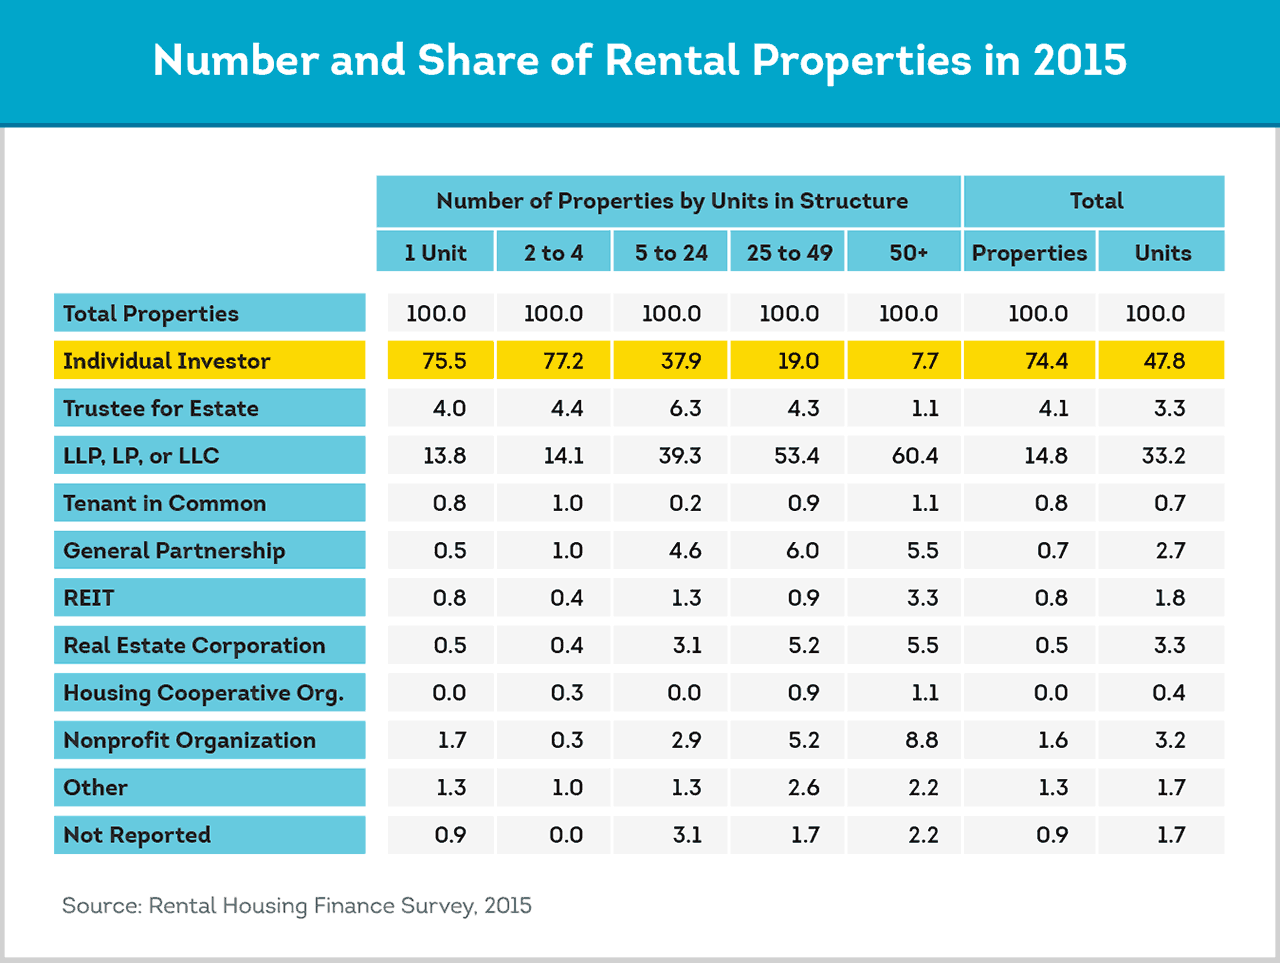 individual investors hold the largest percentage of rental housing